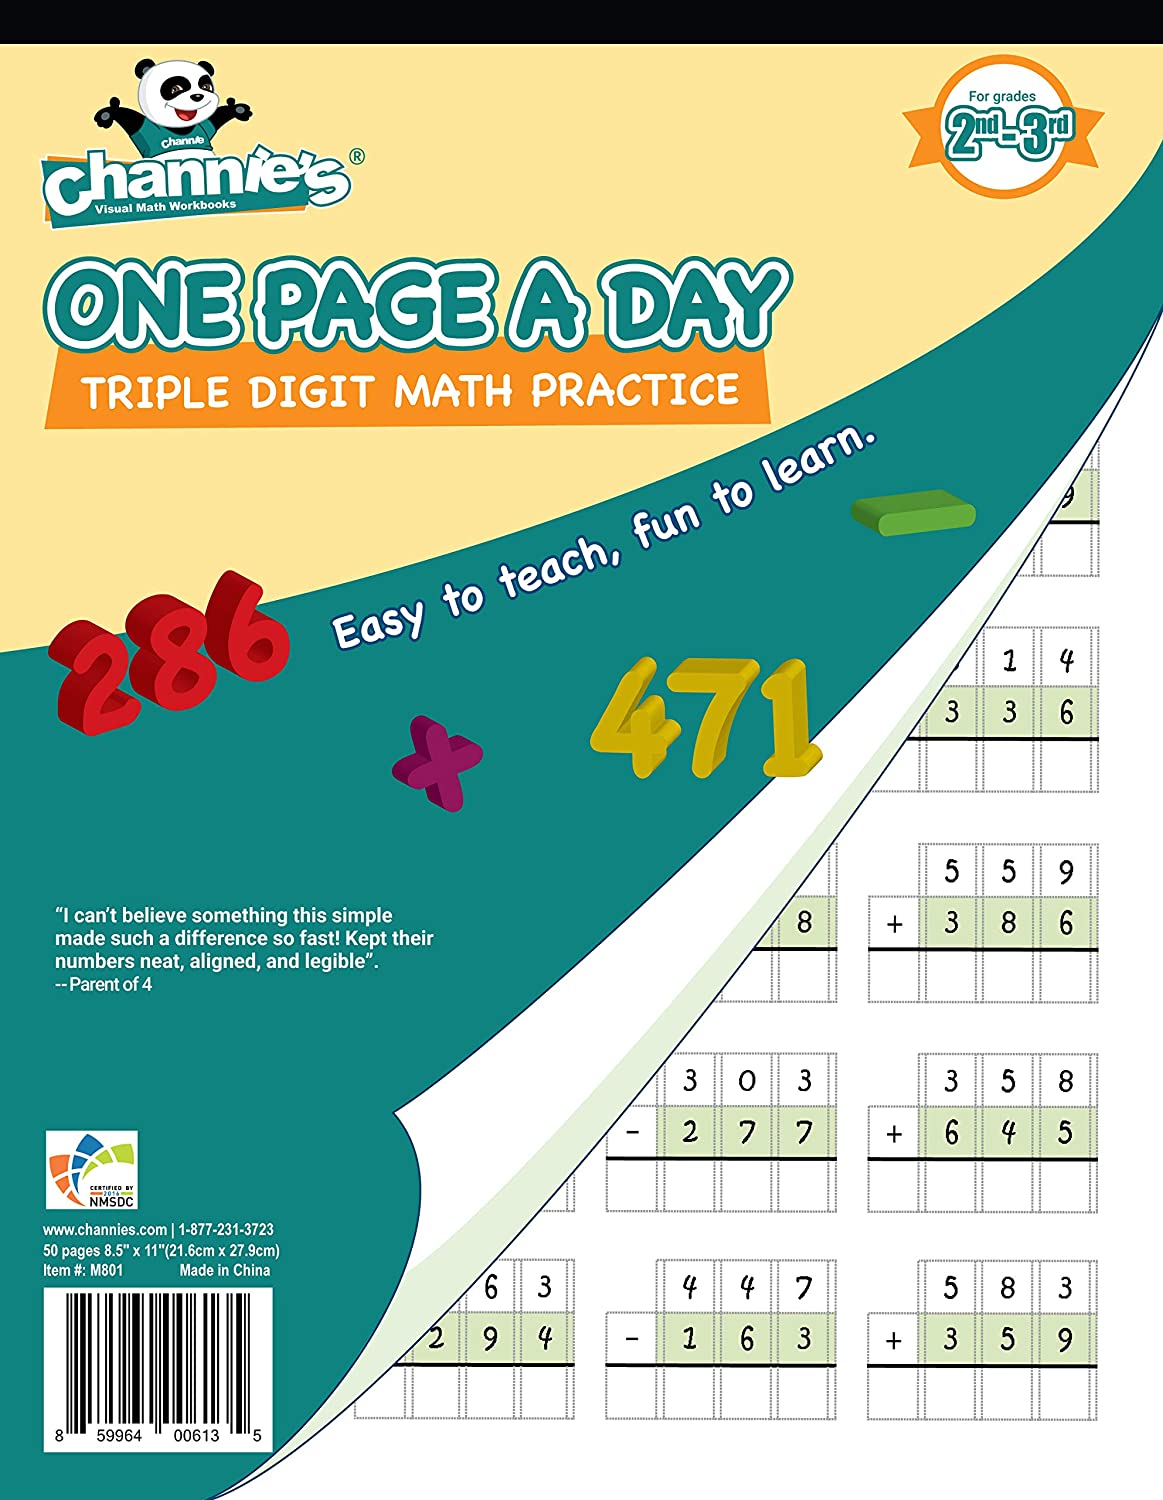 Channie’s One Page A Day Math Workbook, Triple Digit Math Practice Worksheets, 50 Pages Front and Back, 25 Sheets, Grades 2nd and 3rd, Addition and Subtraction workbook, Size 8.5” x 11”